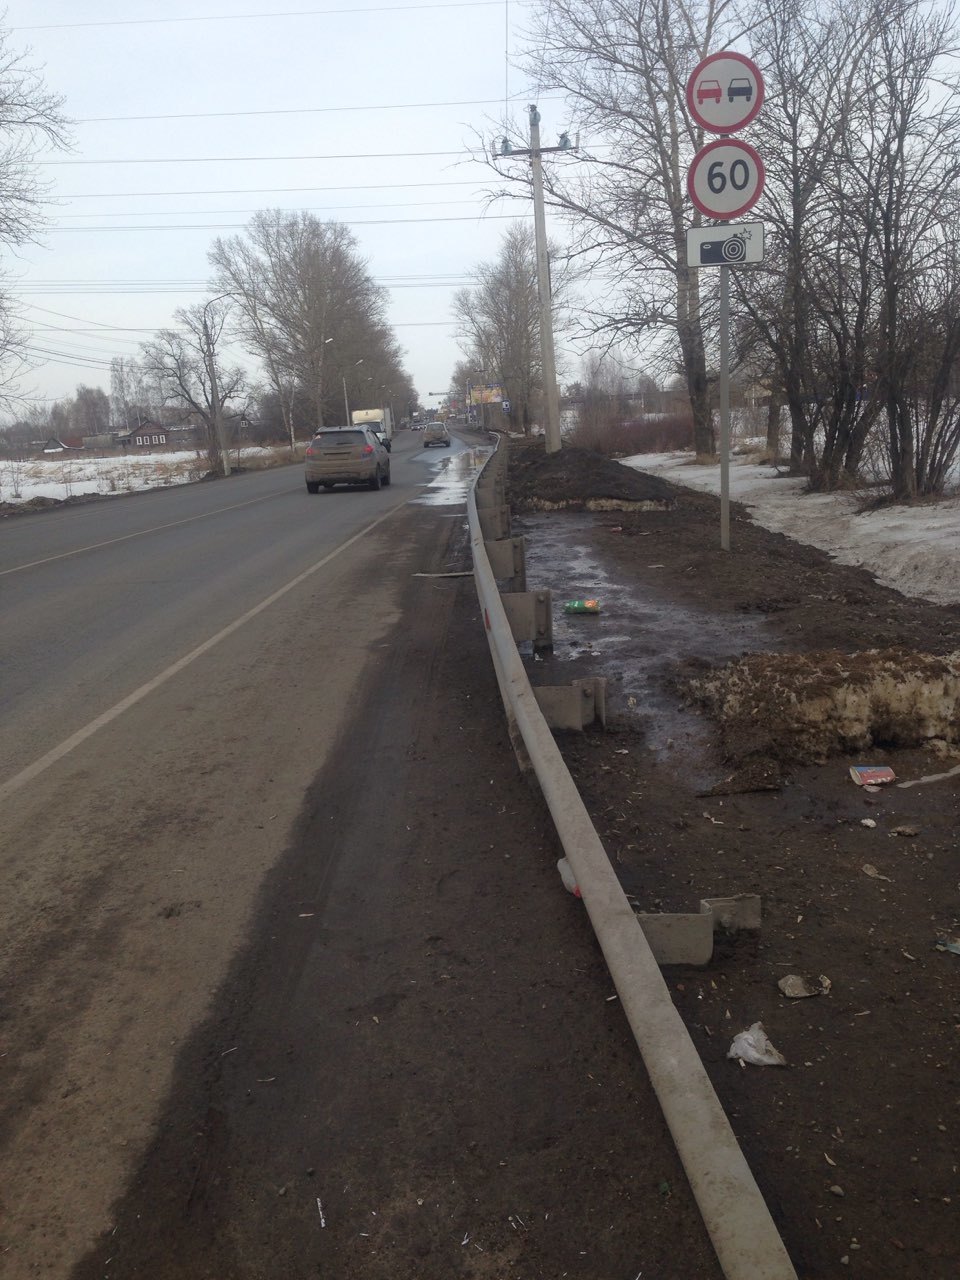 Inaction of the Administration of Noginsk - My, Noginsk, Administration, Traffic rules, Road, Sidewalk, Stop, Negative, No rating